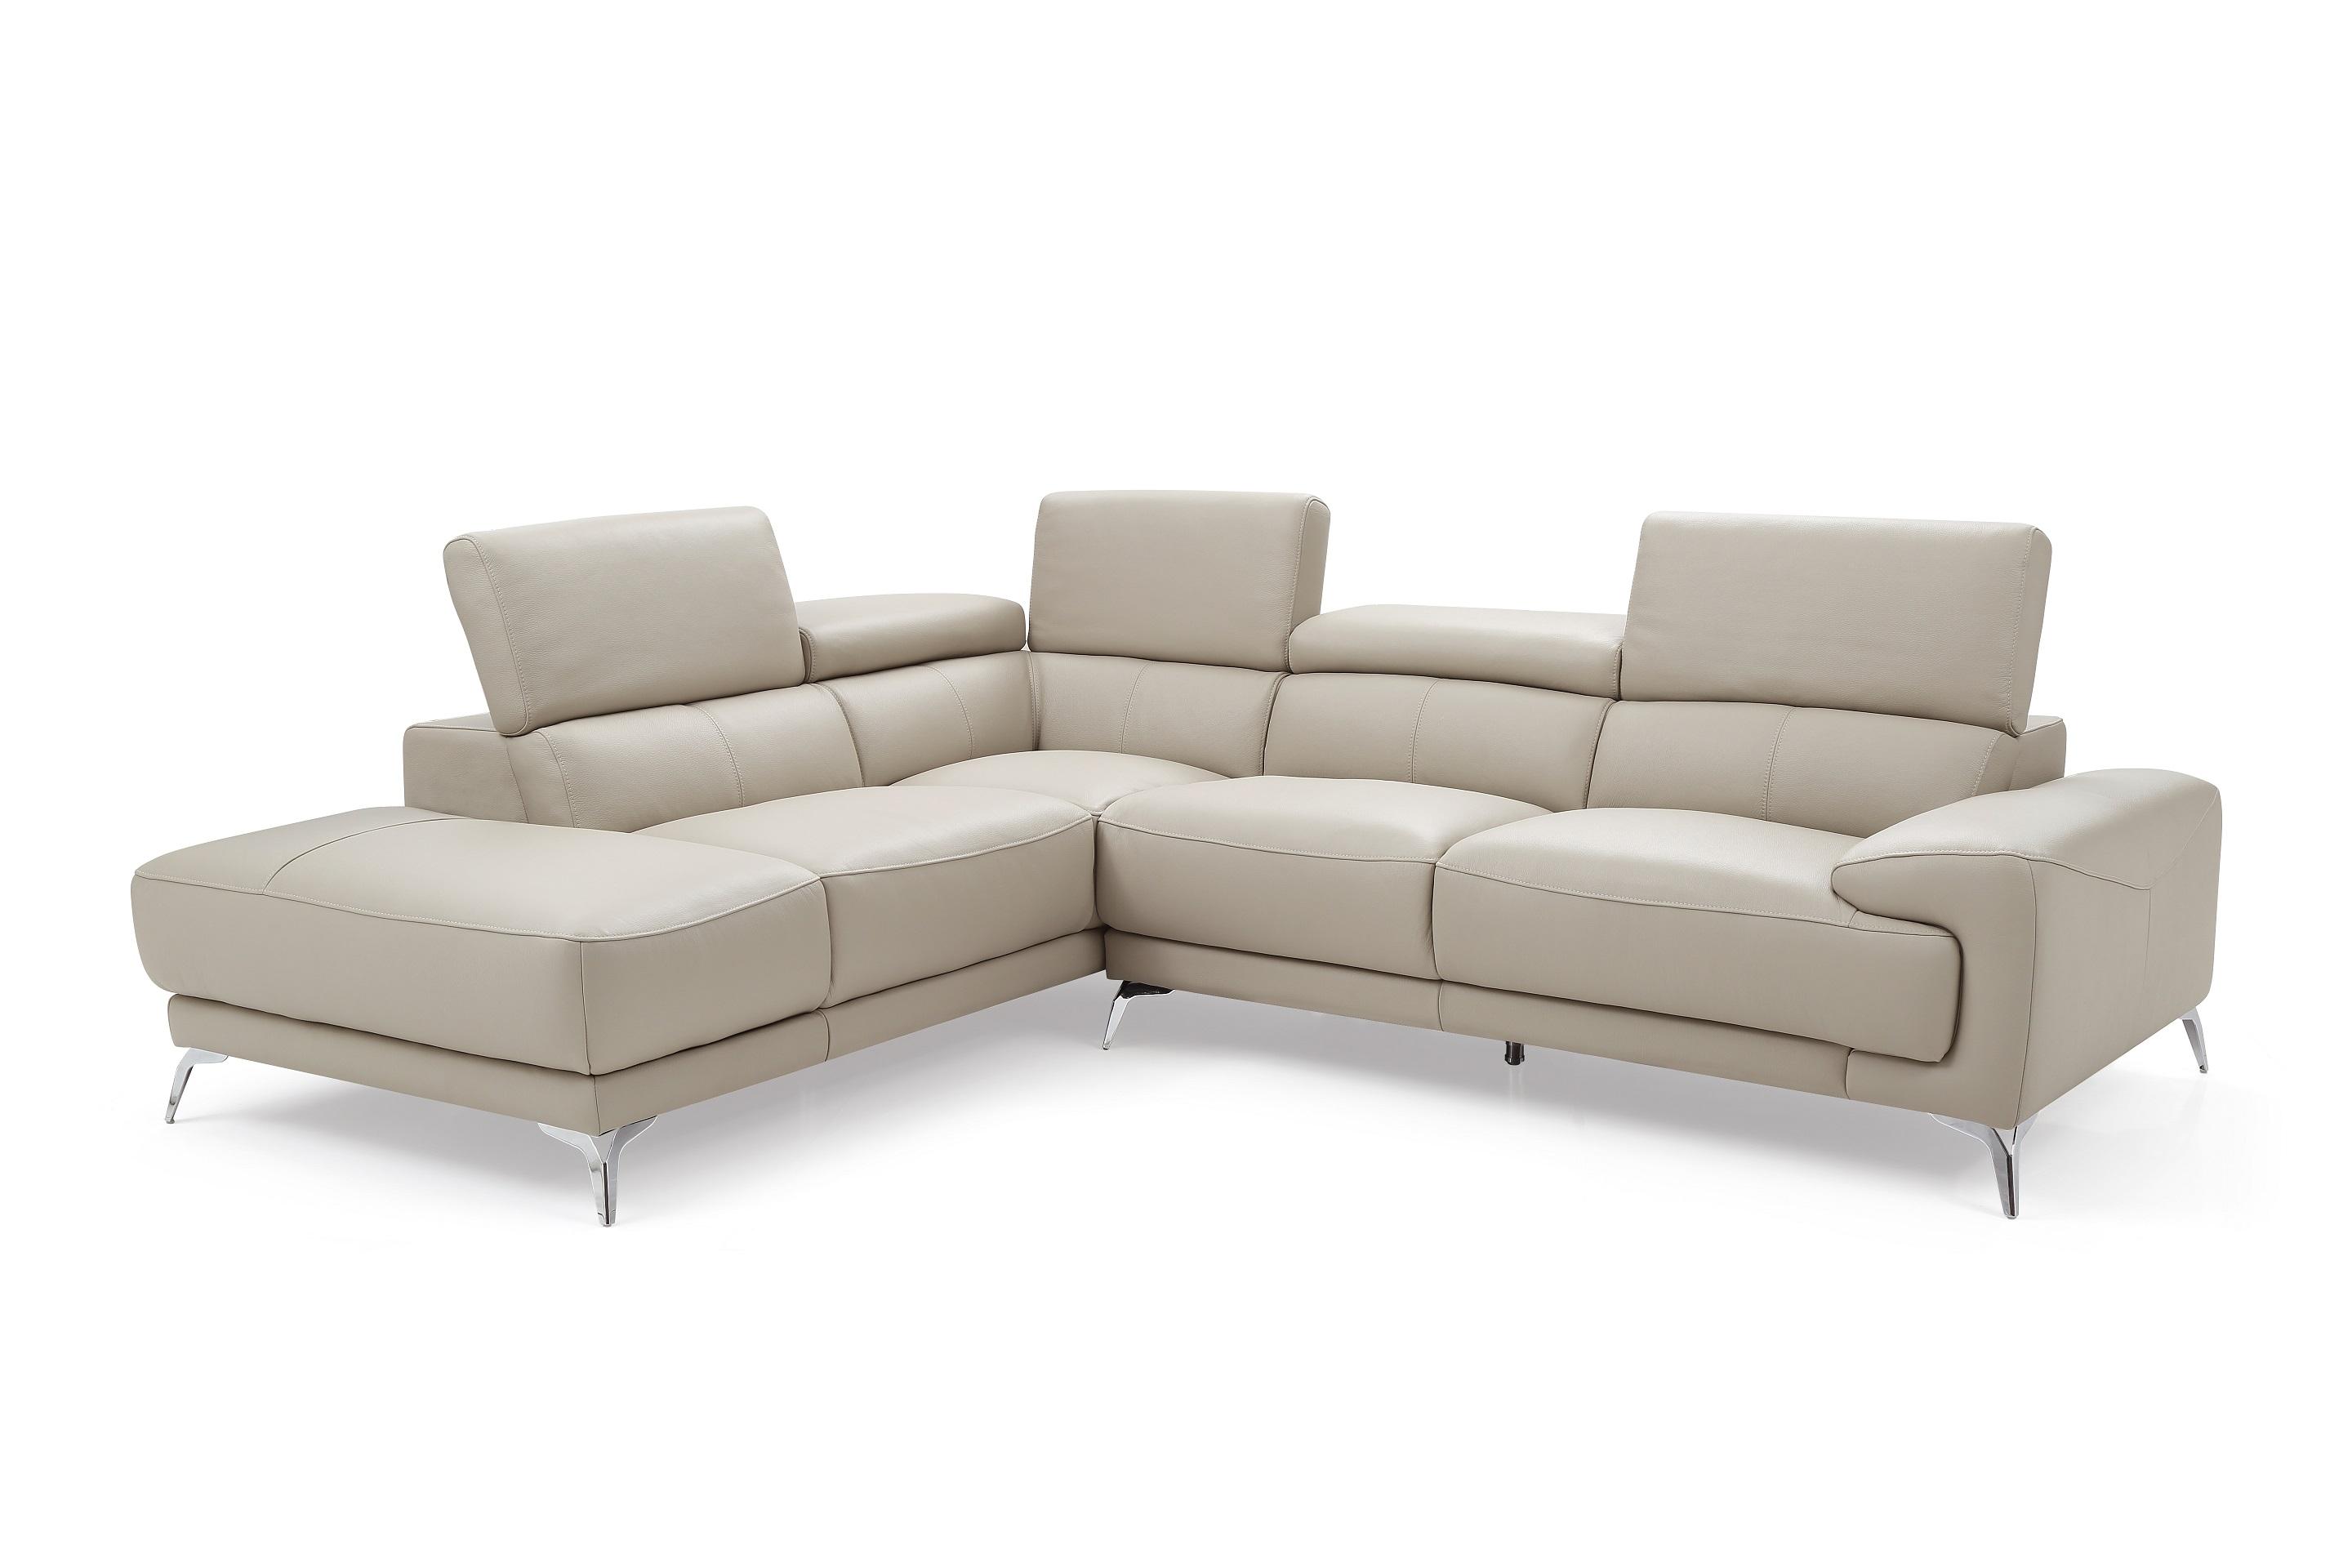 Contemporary Sectional SL1467LS-LGRY Fabiola SL1467LS-LGRY in Light Gray Top grain leather